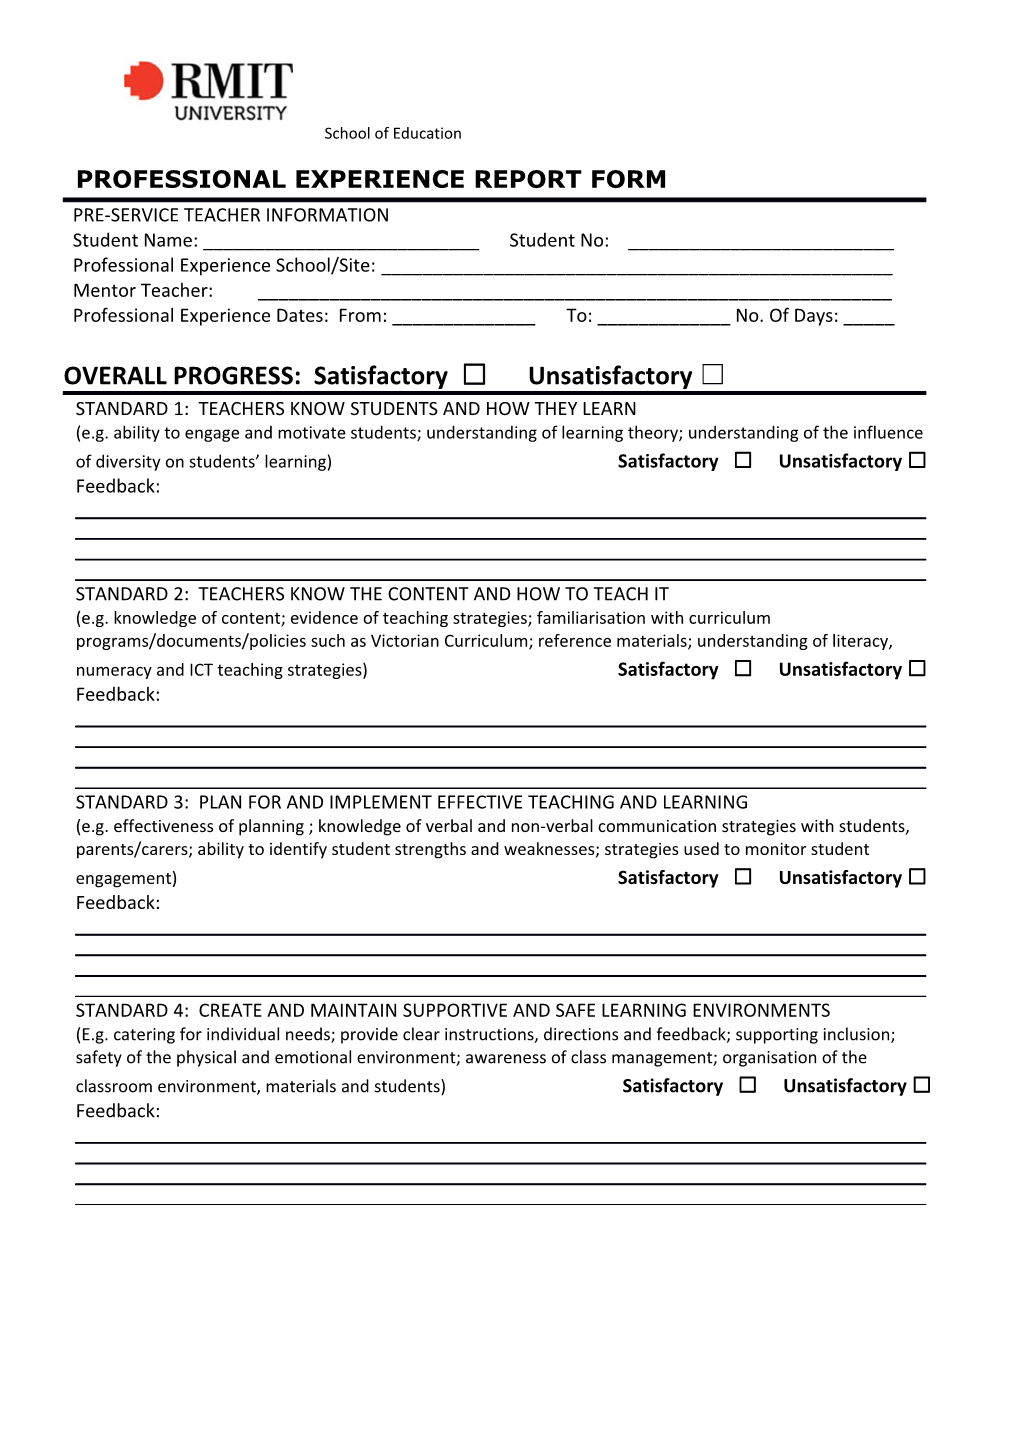 Professional Experience Report Form